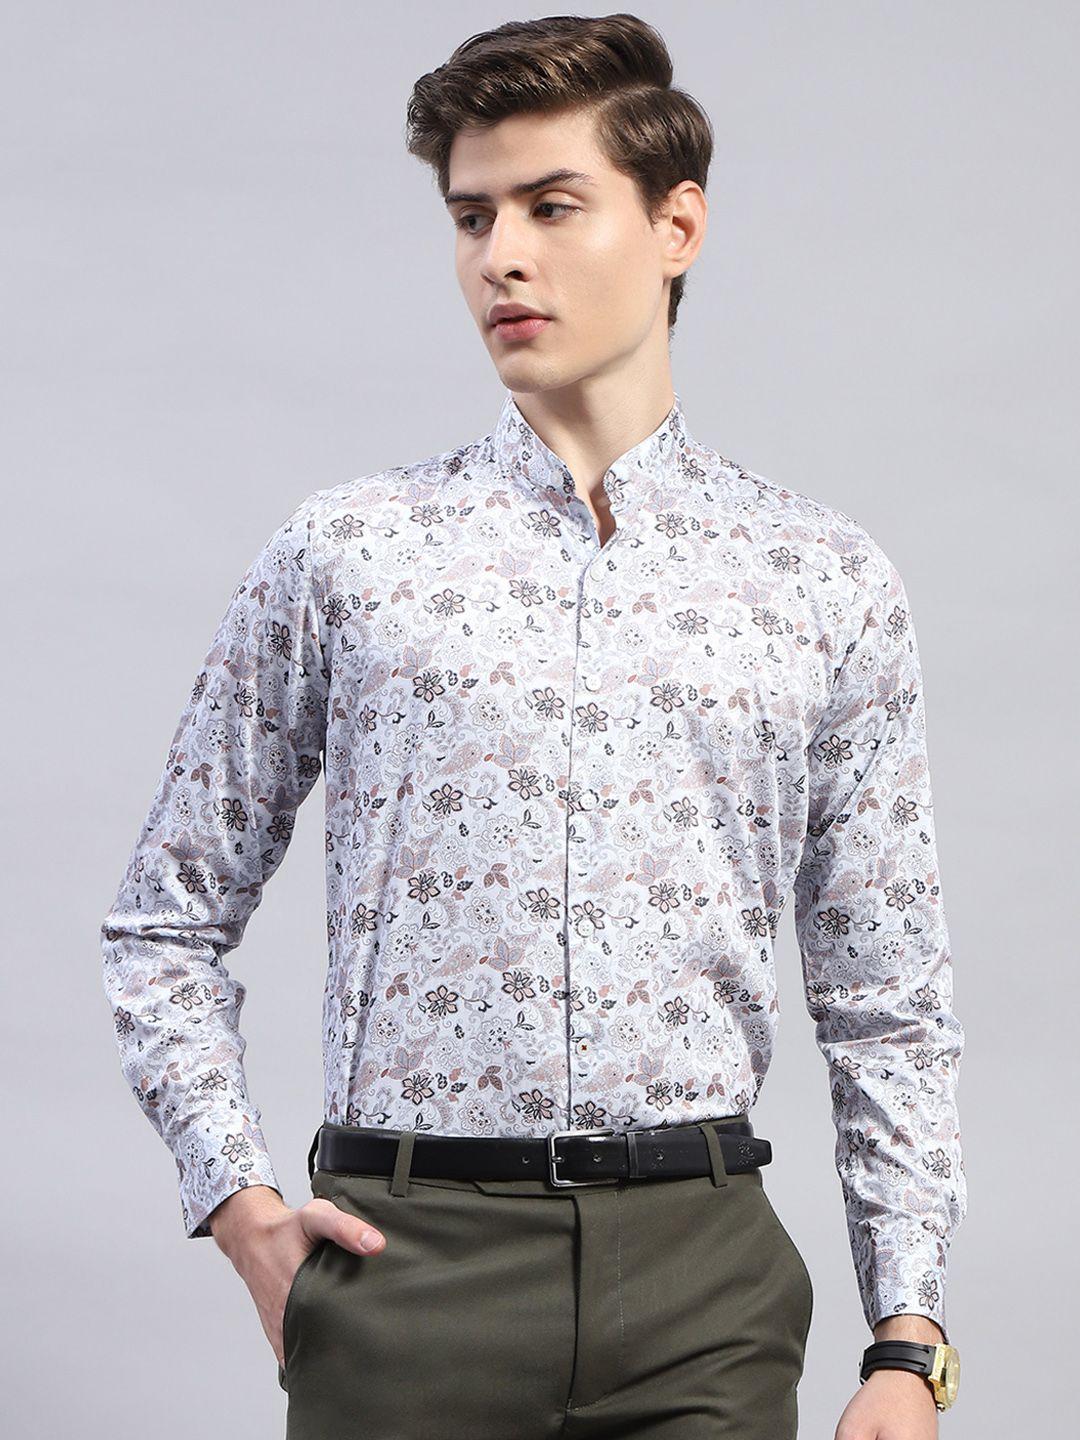 monte carlo men classic floral opaque printed casual shirt